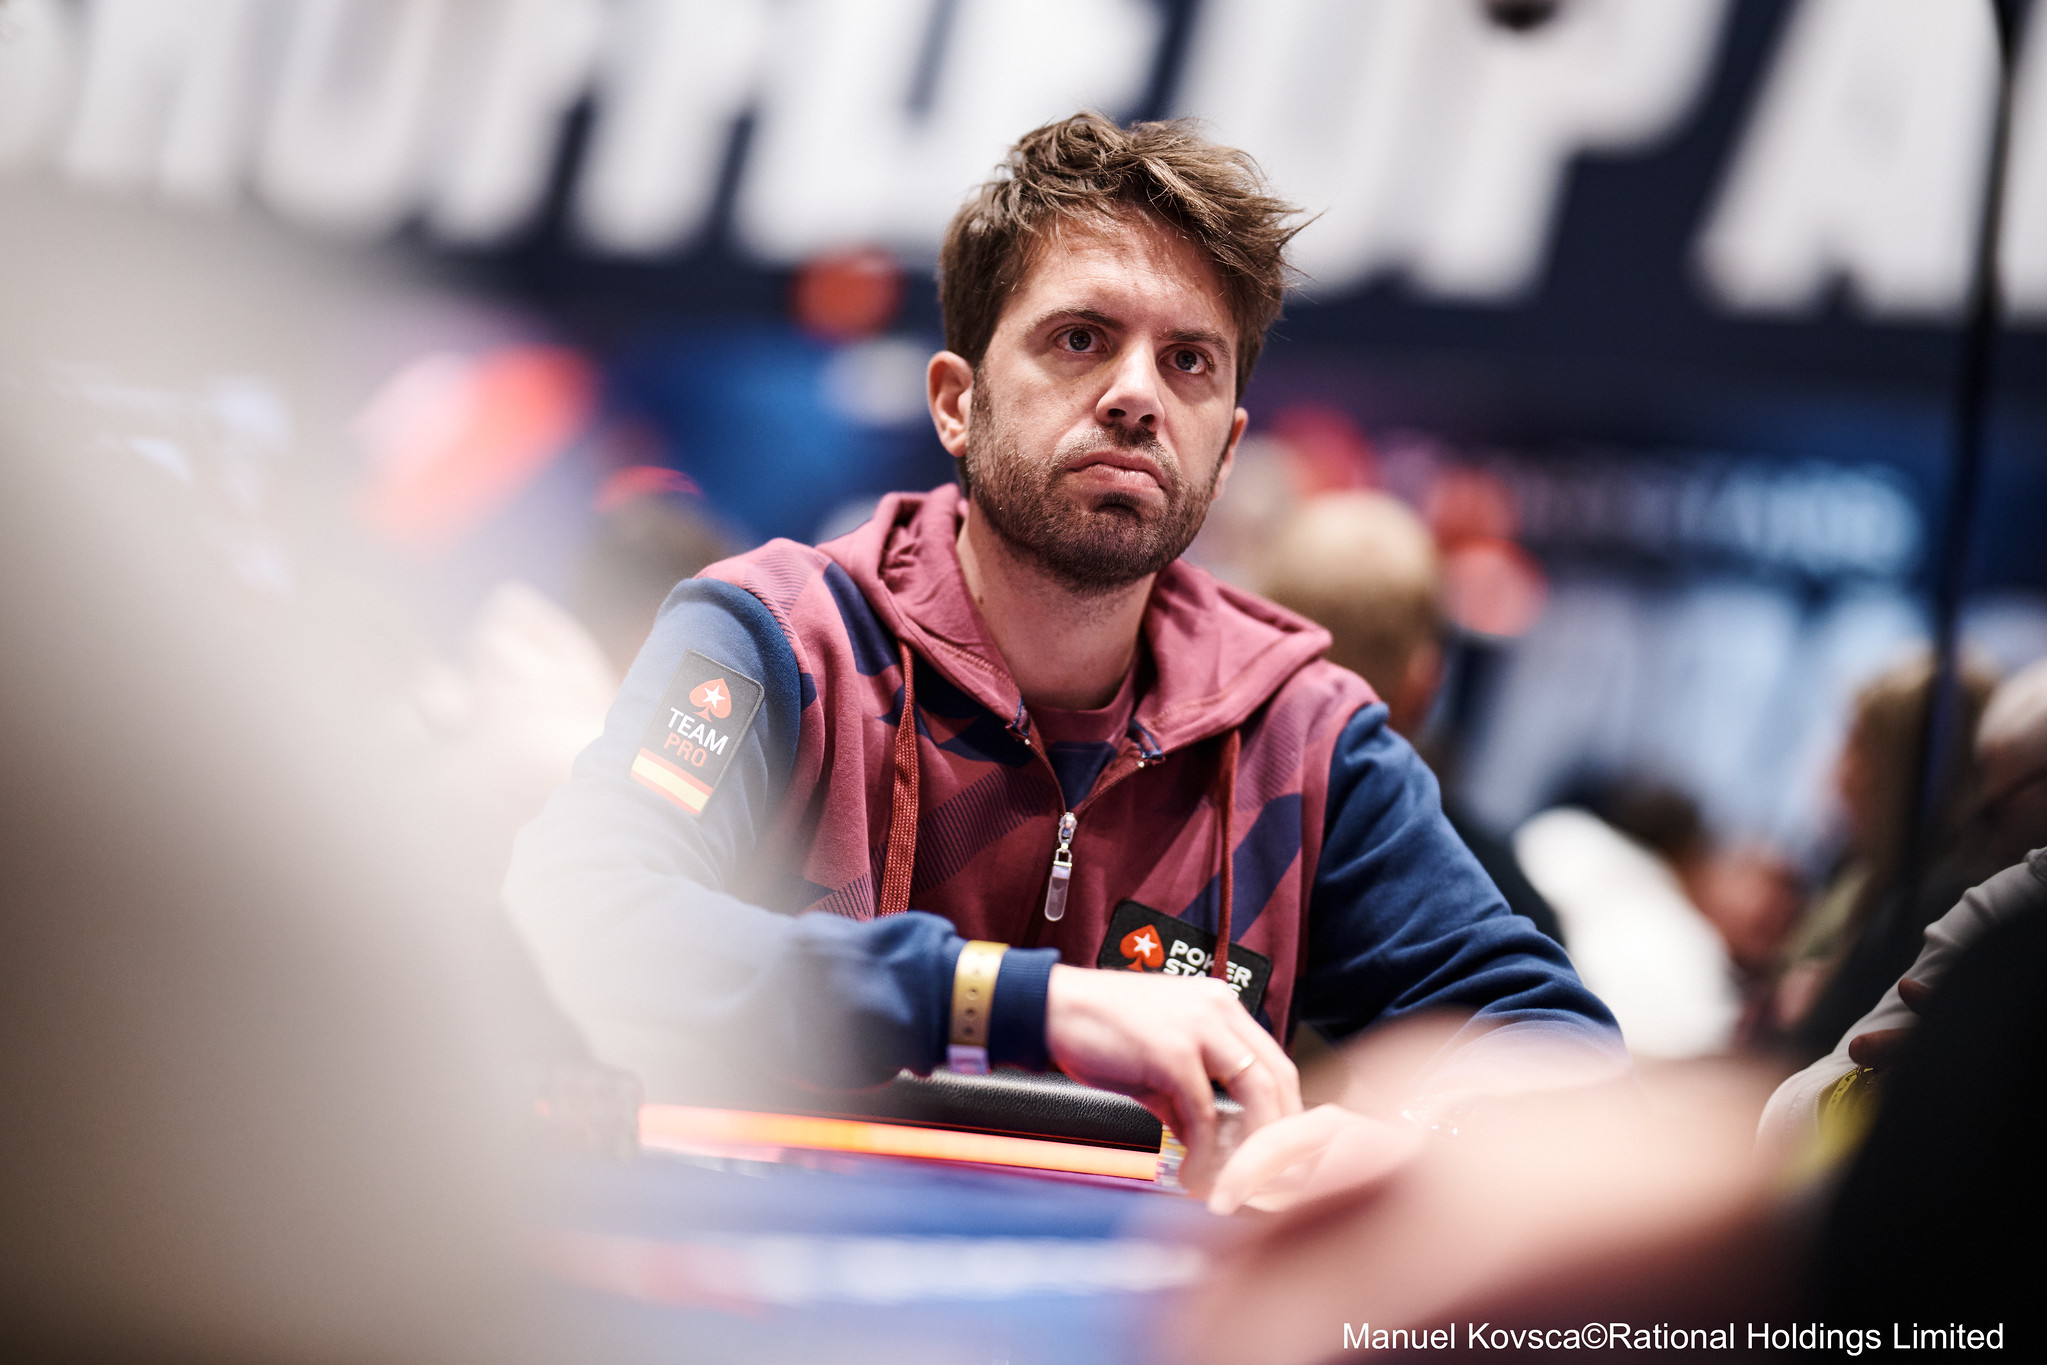 EPT: Main Event FPS breaks the record in advance